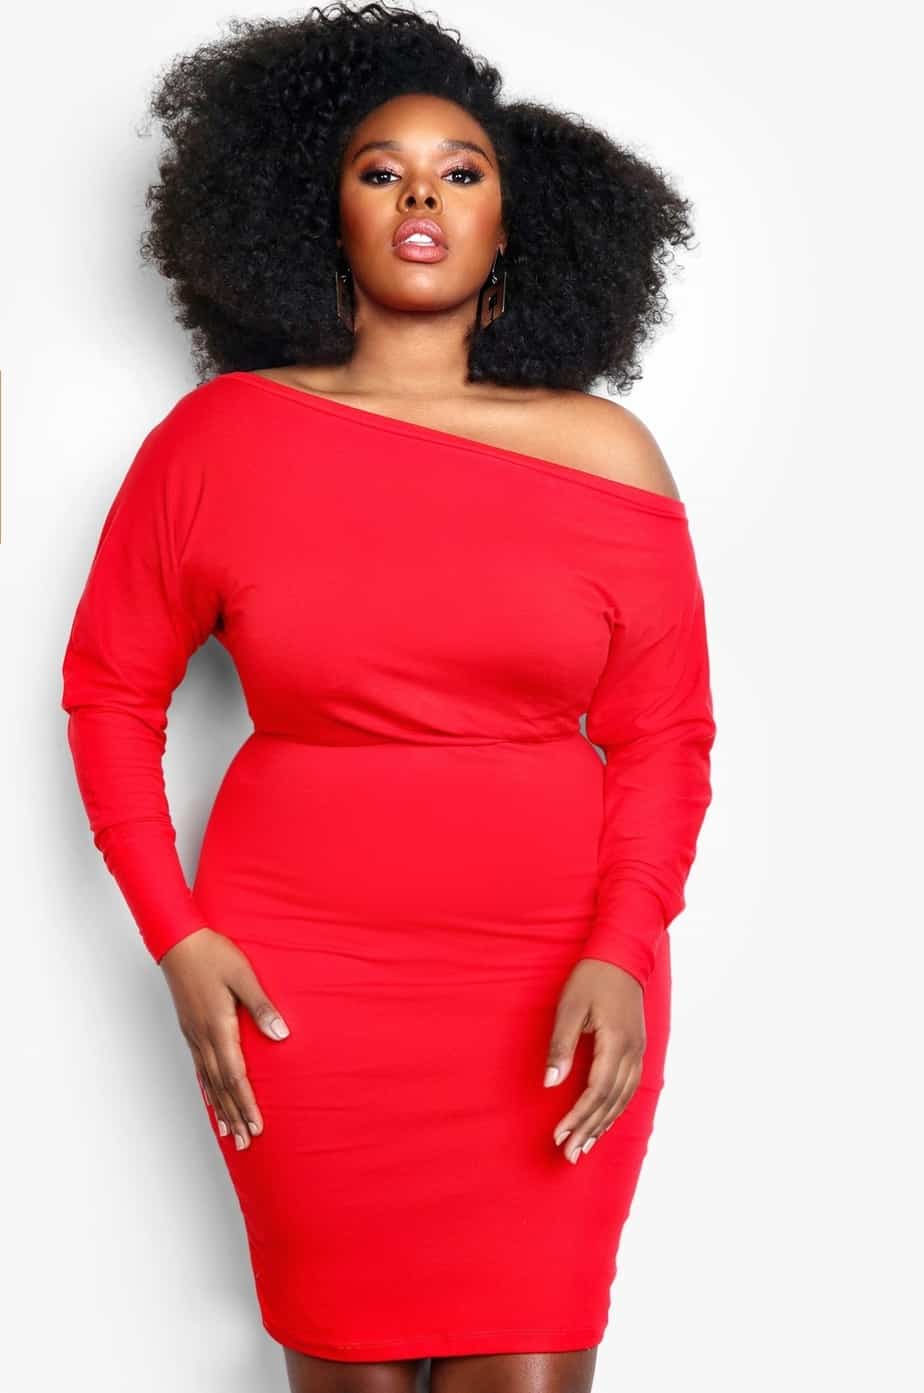 REBDOLLS "Always On" Over The Shoulder Long Sleeve Bodycon Mini Dress - Red 